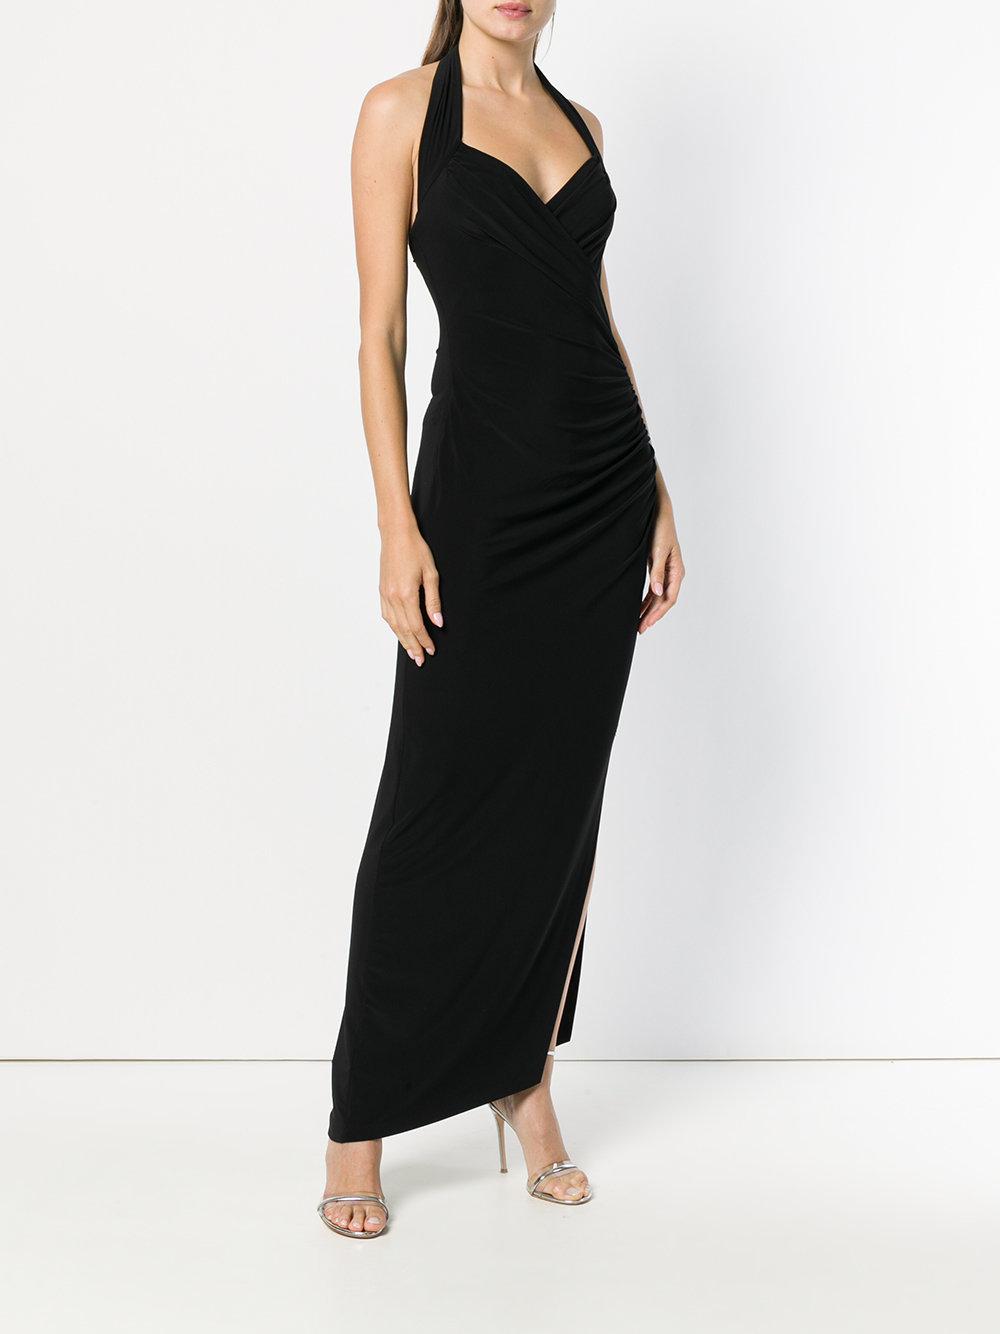 Norma Kamali Synthetic Halter-neck Fitted Maxi Dress in Black - Lyst